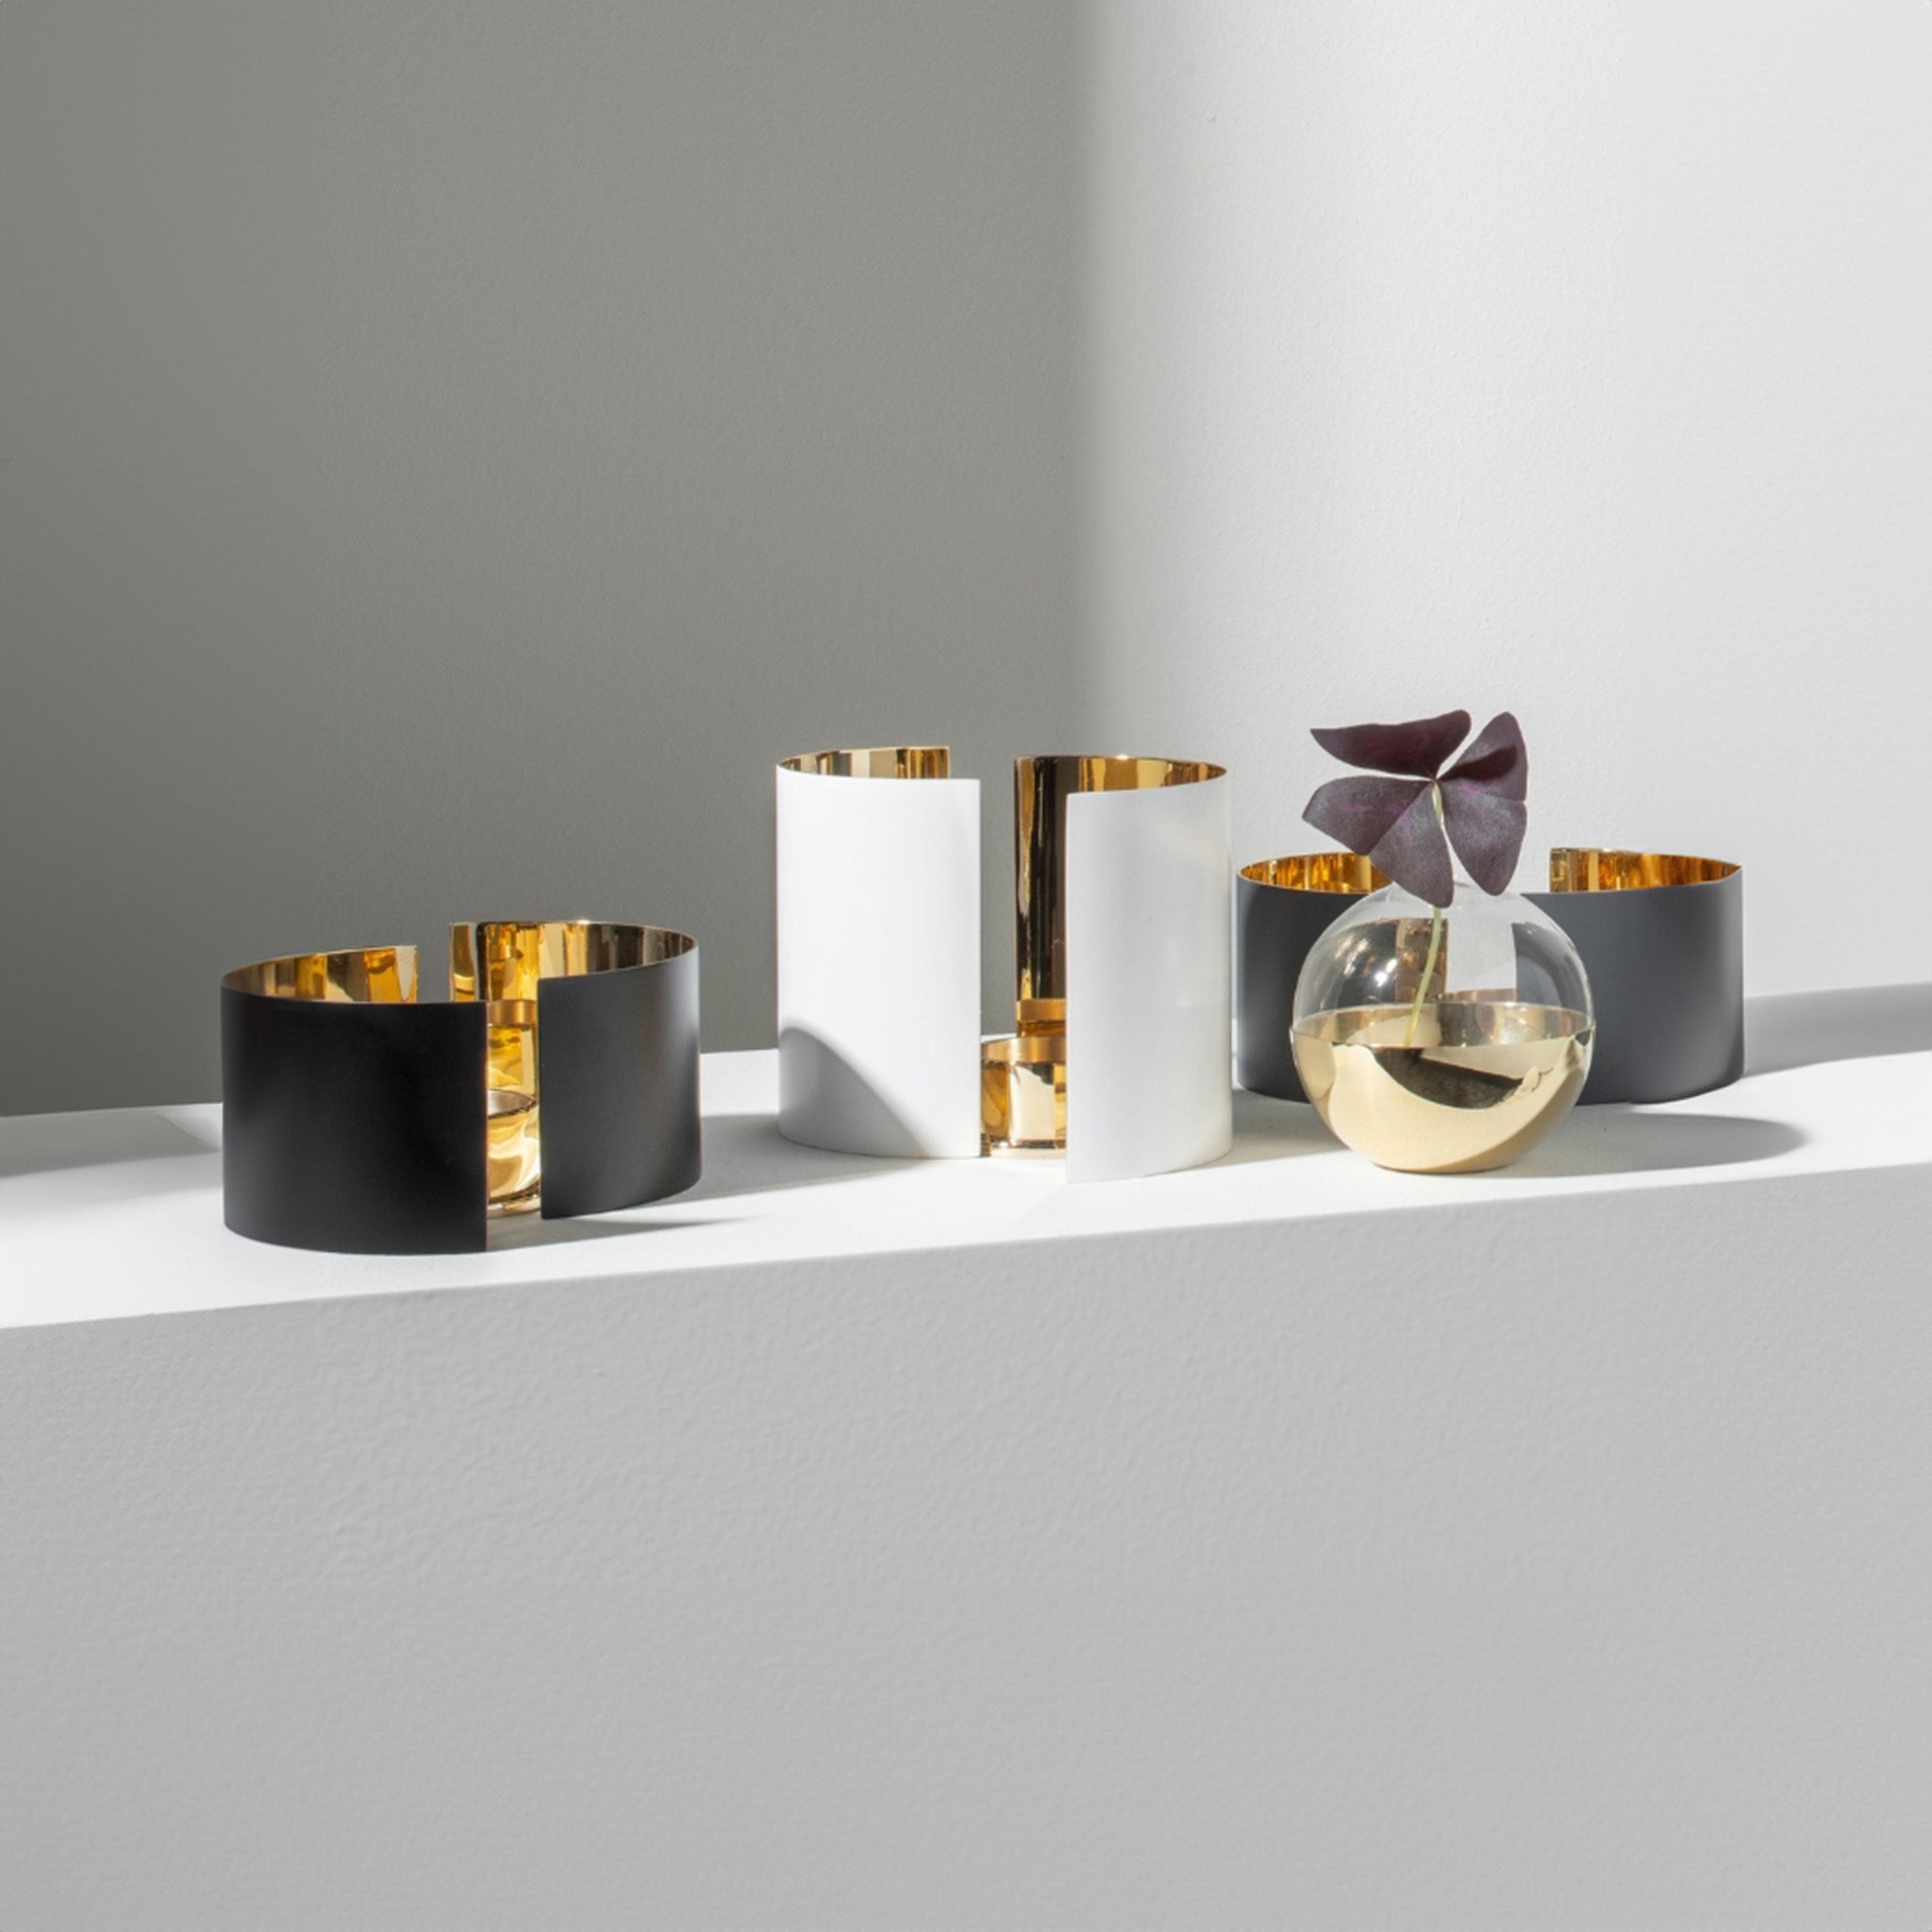 a group of three candle holder by skultuna (black, white, and gray) sitting on top of a white shelf